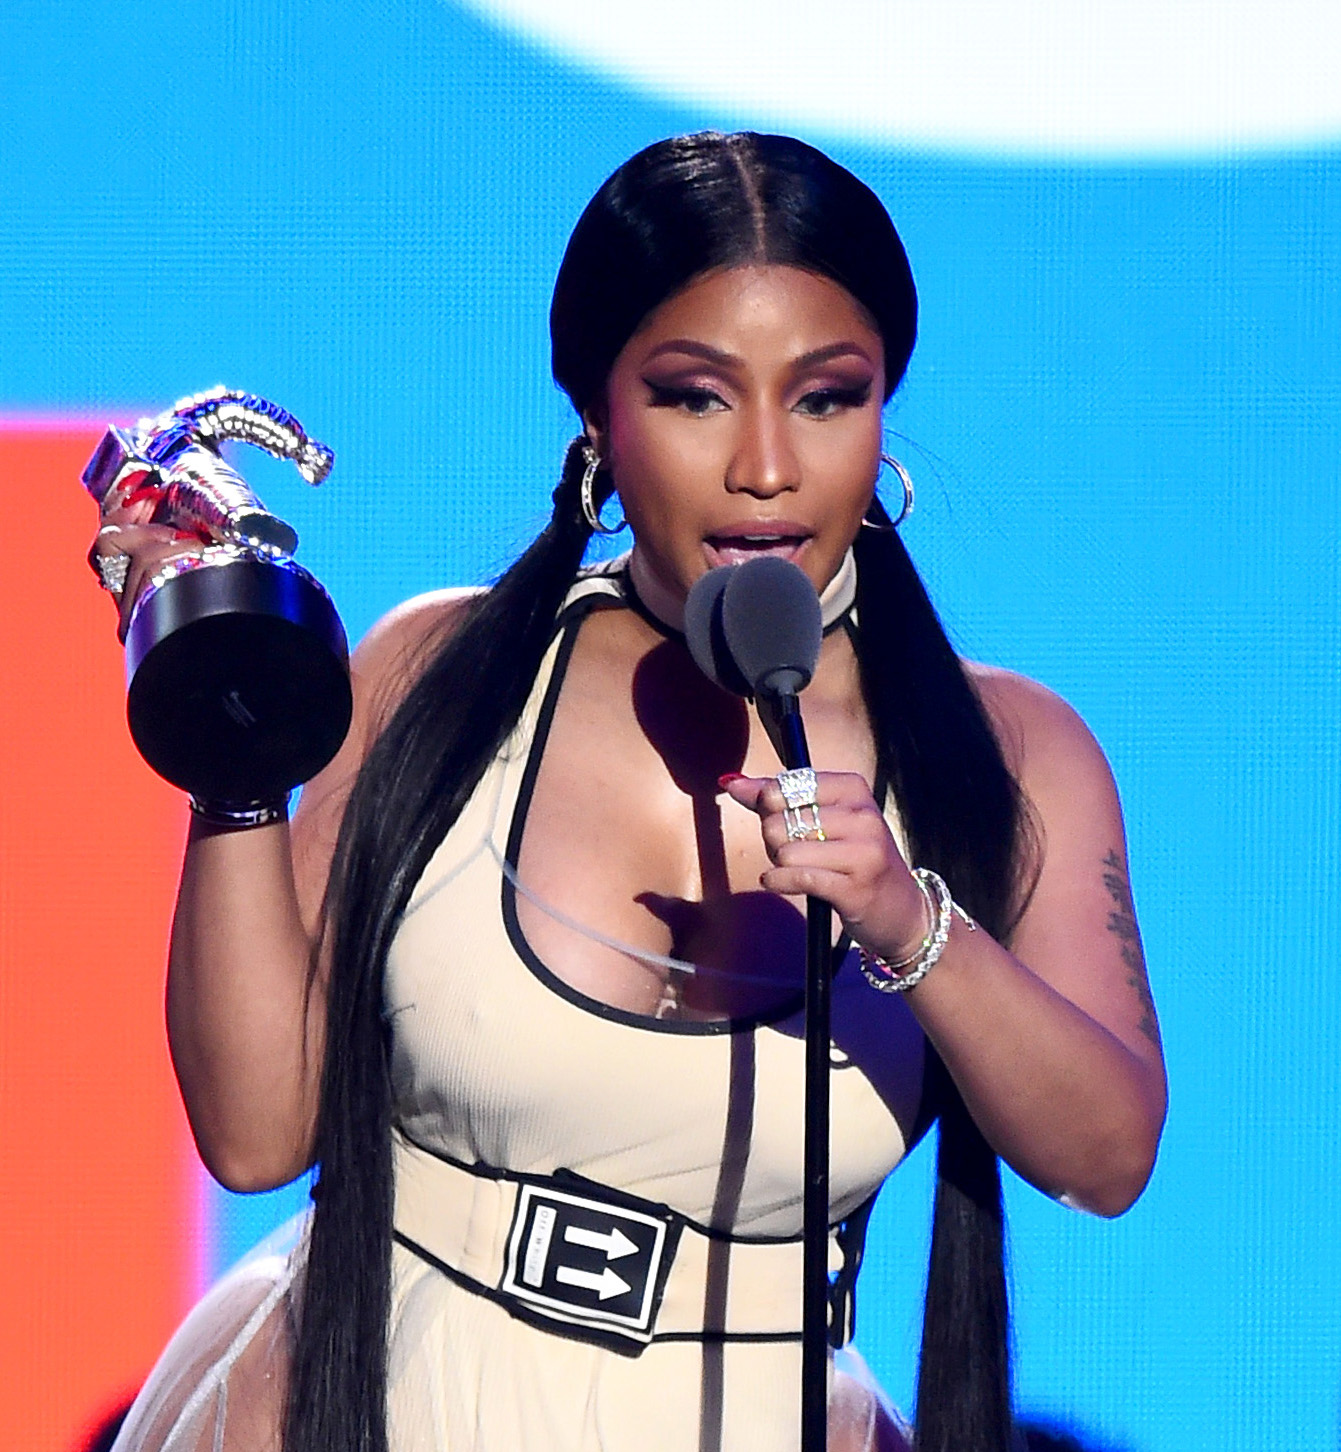 NEW YORK, NY - AUGUST 20: Nicki Minaj accepts the award for 'Best Hip Hop Video' onstage during the 2018 MTV Video Music Awards at Radio City Music Hall on August 20, 2018 in New York City. (Photo by Theo Wargo/Getty Images)